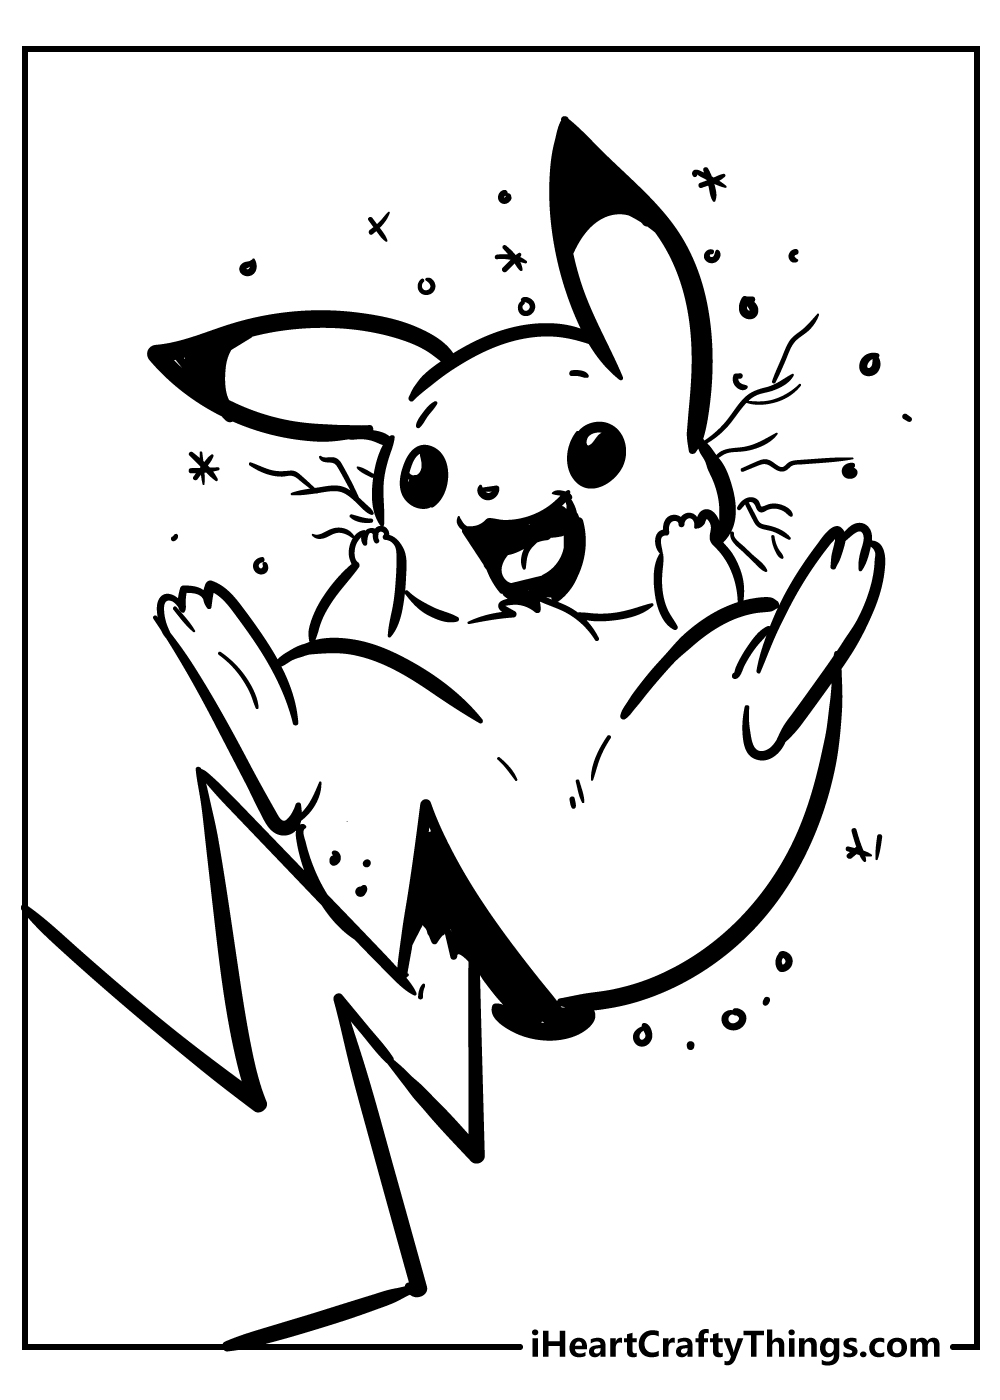 Pikachu coloring pages for adults free printable